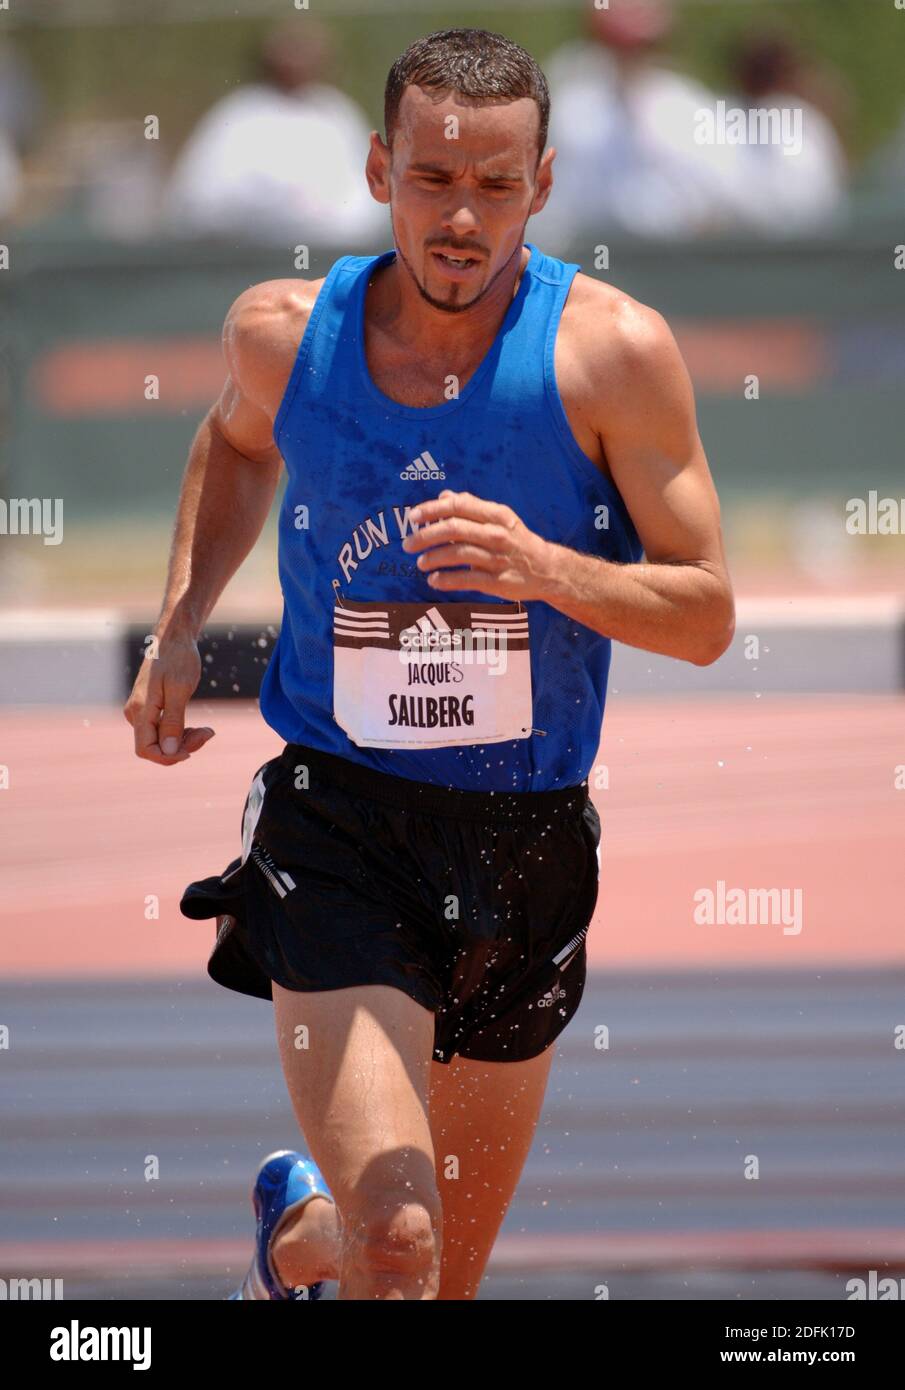 Carson, United States. 22nd May, 2005. Jacques Salberg placed second in the  steeplechase in 8:42.15 in the adidas Track Classic at the Home Depot  Center in Carson, Calif. on Sunday, May 22,